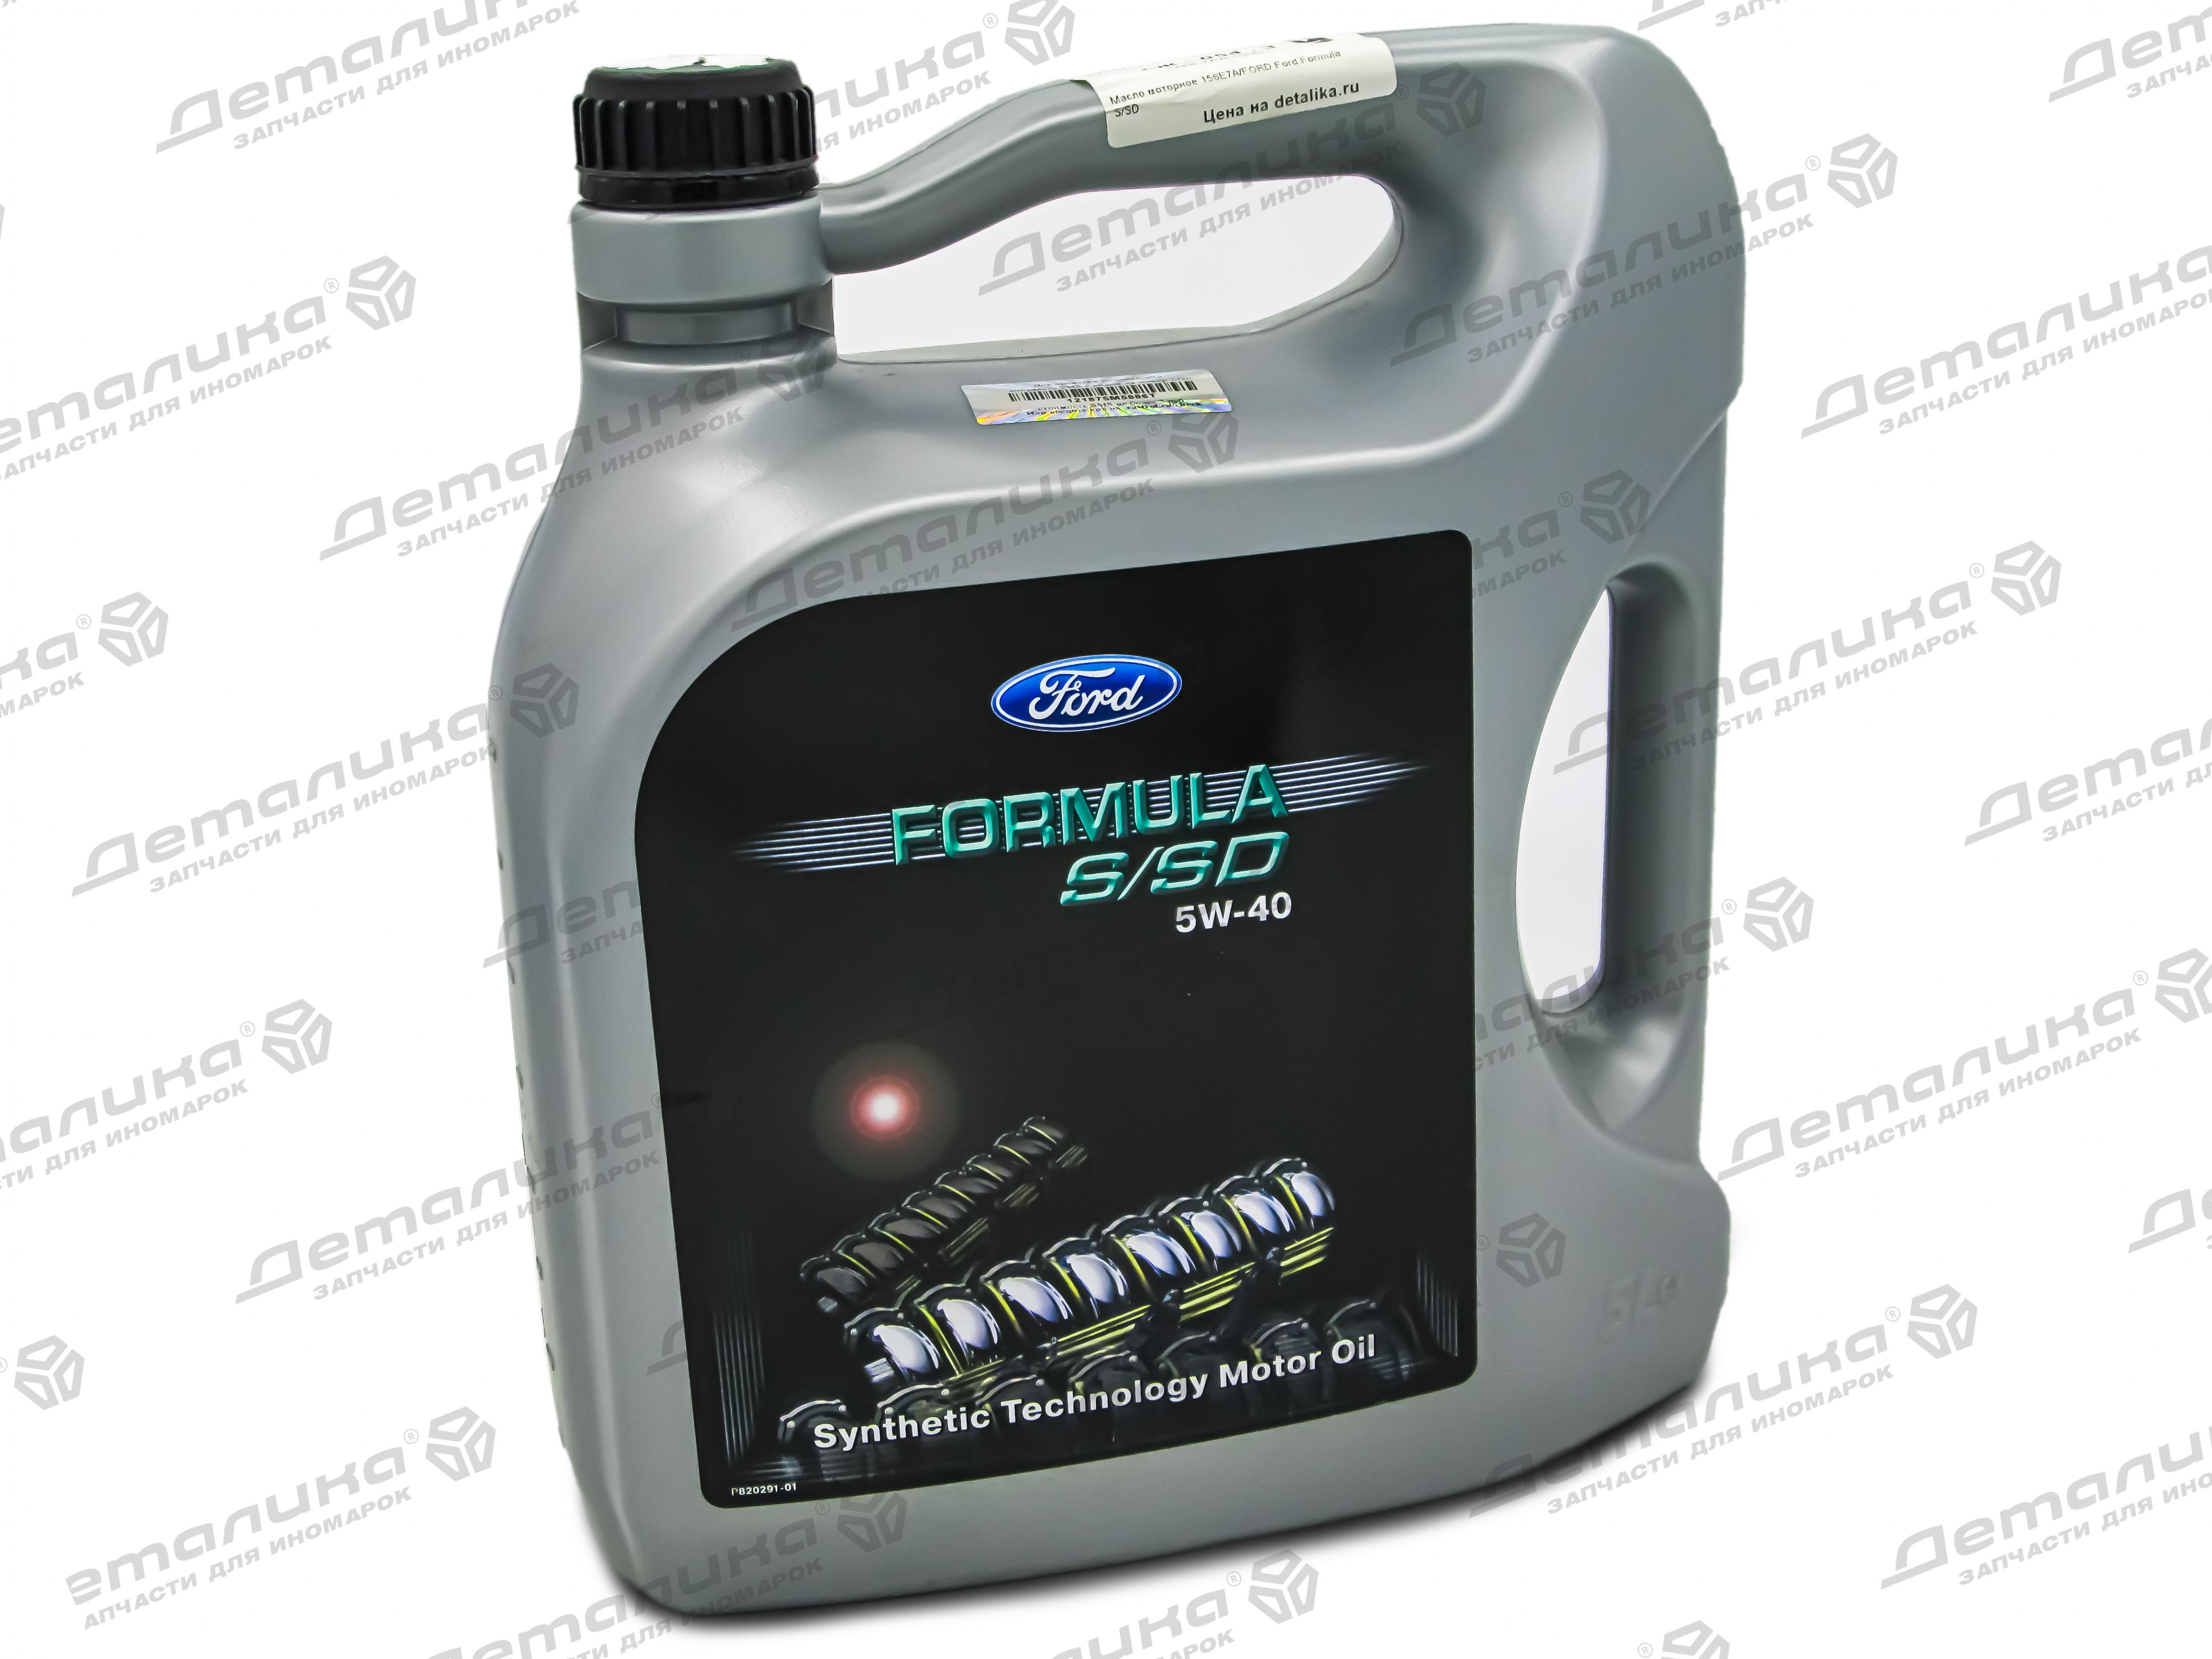 Масло в транзит 2.2 дизель. Ford Formula s/SD 5w40. Ford Oil 156e7a. Масло Ford Formula 5w40 s/SD 5л синт. 156e7a Ford масло моторное Formula s/SD 5w40 5л.